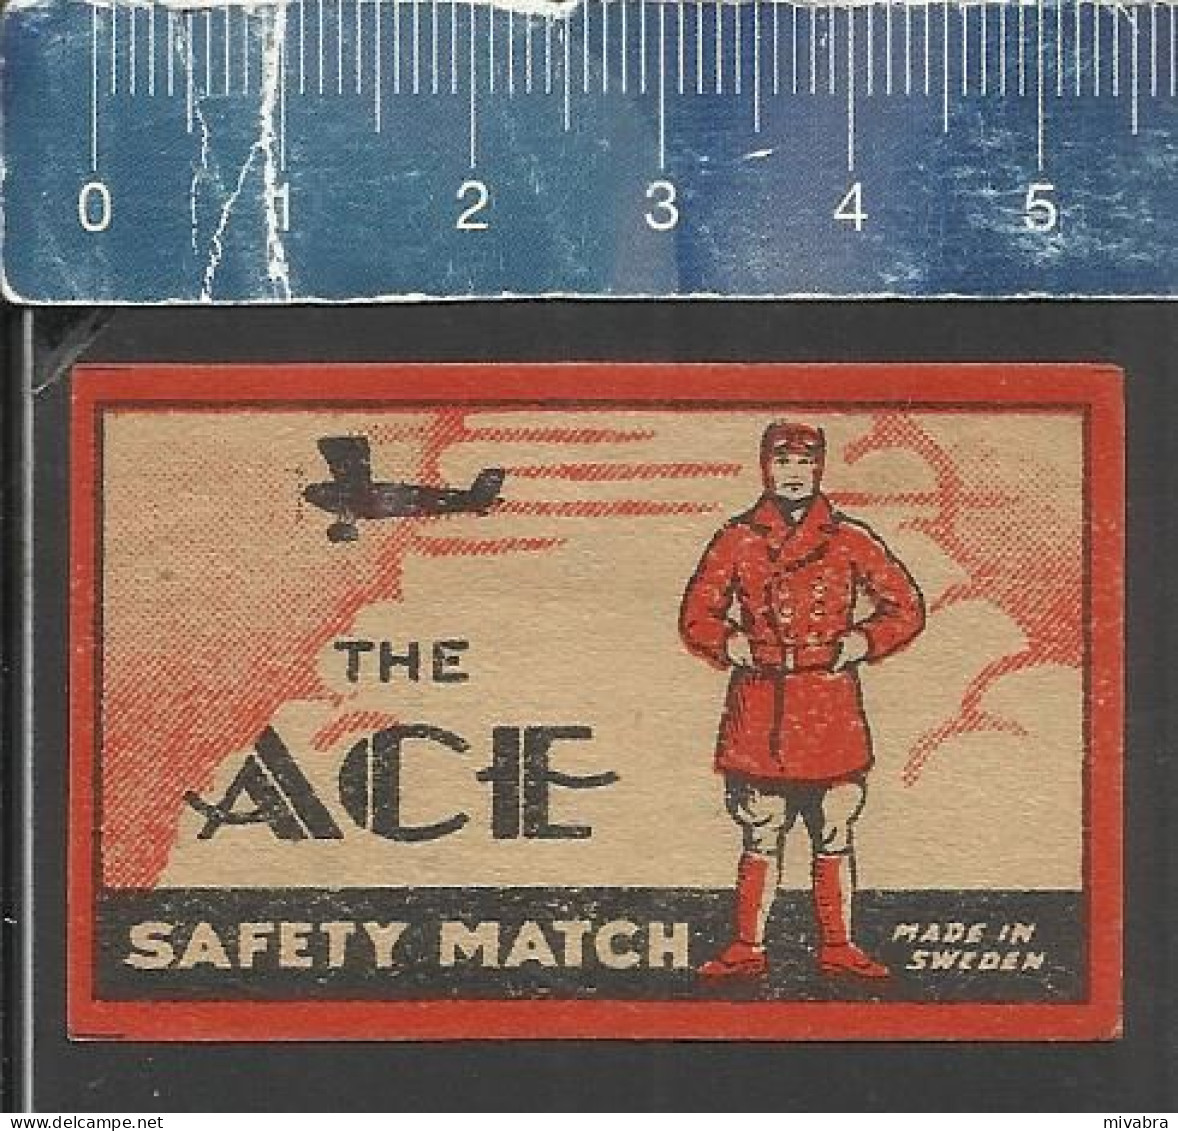 THE ACE (flying Ace Fighter Ace Or Air Ace Is A Military Aviator Shooting Down Enemy Aircraft) OLD MATCHBOX LABEL SWEDEN - Matchbox Labels